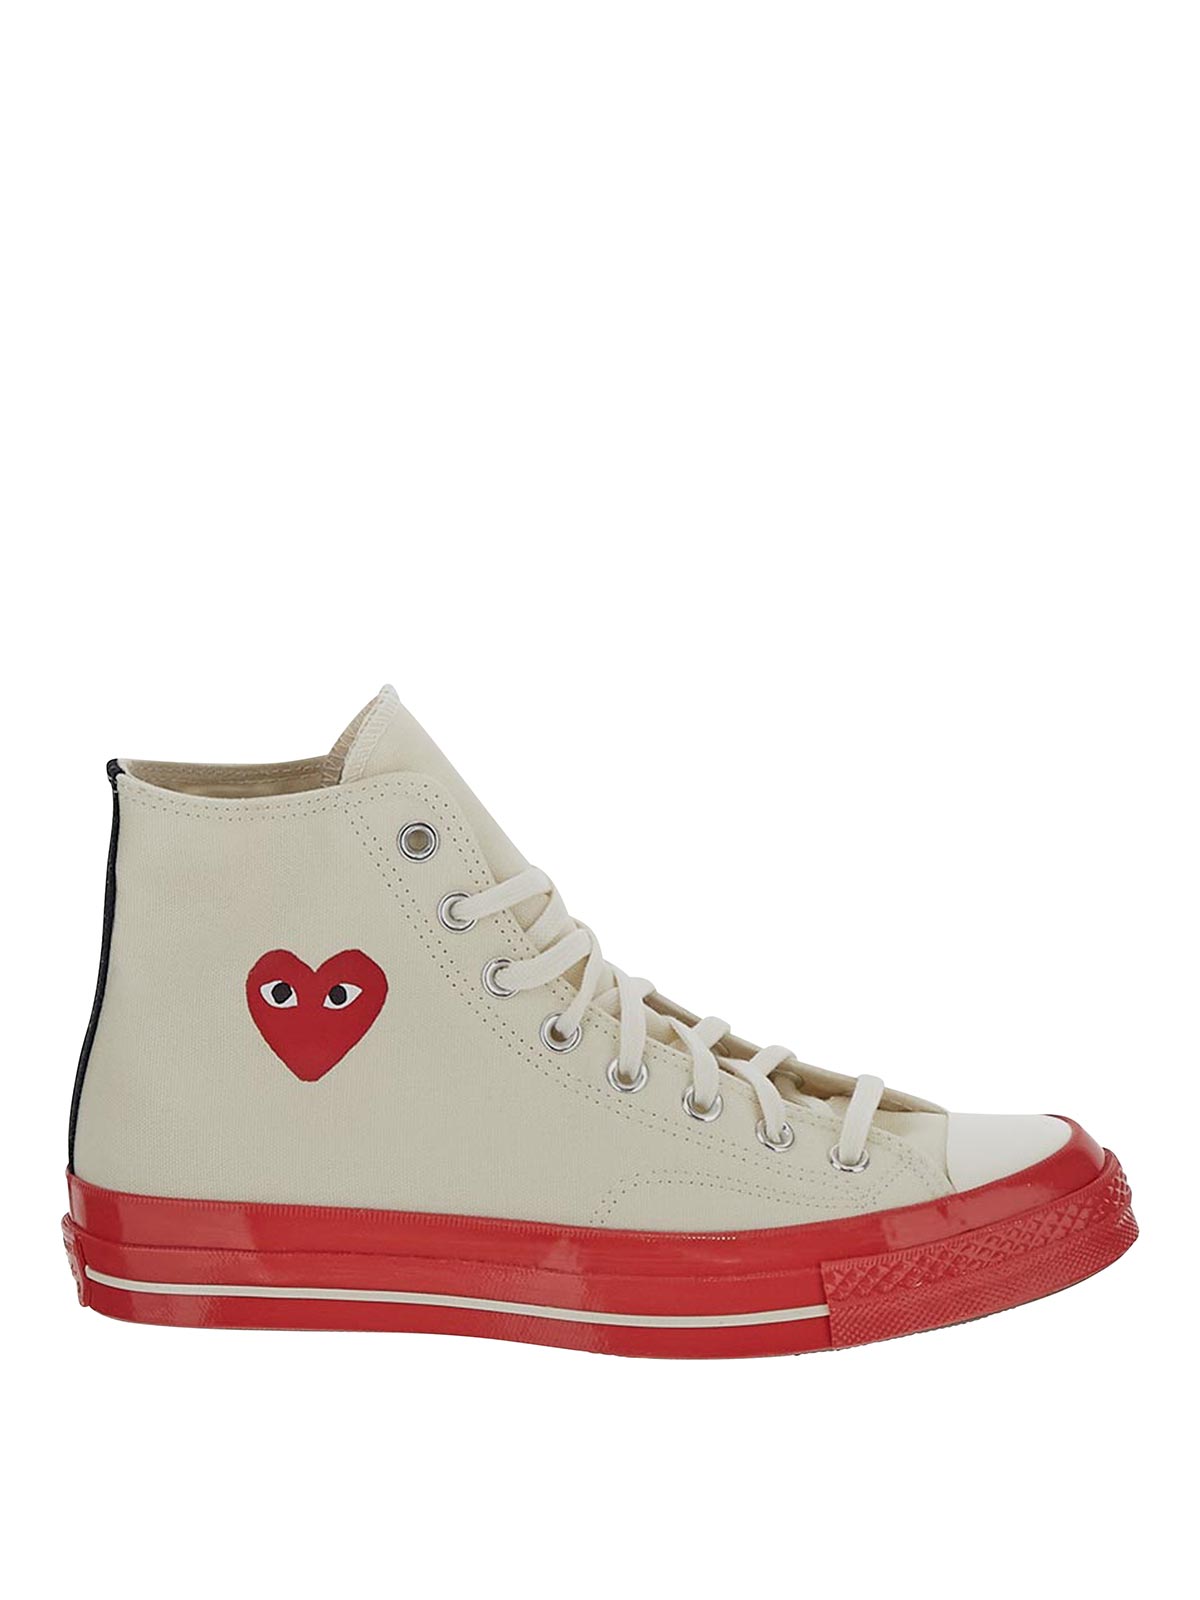 Comme Des Garçons Play High Top Sneakers In White